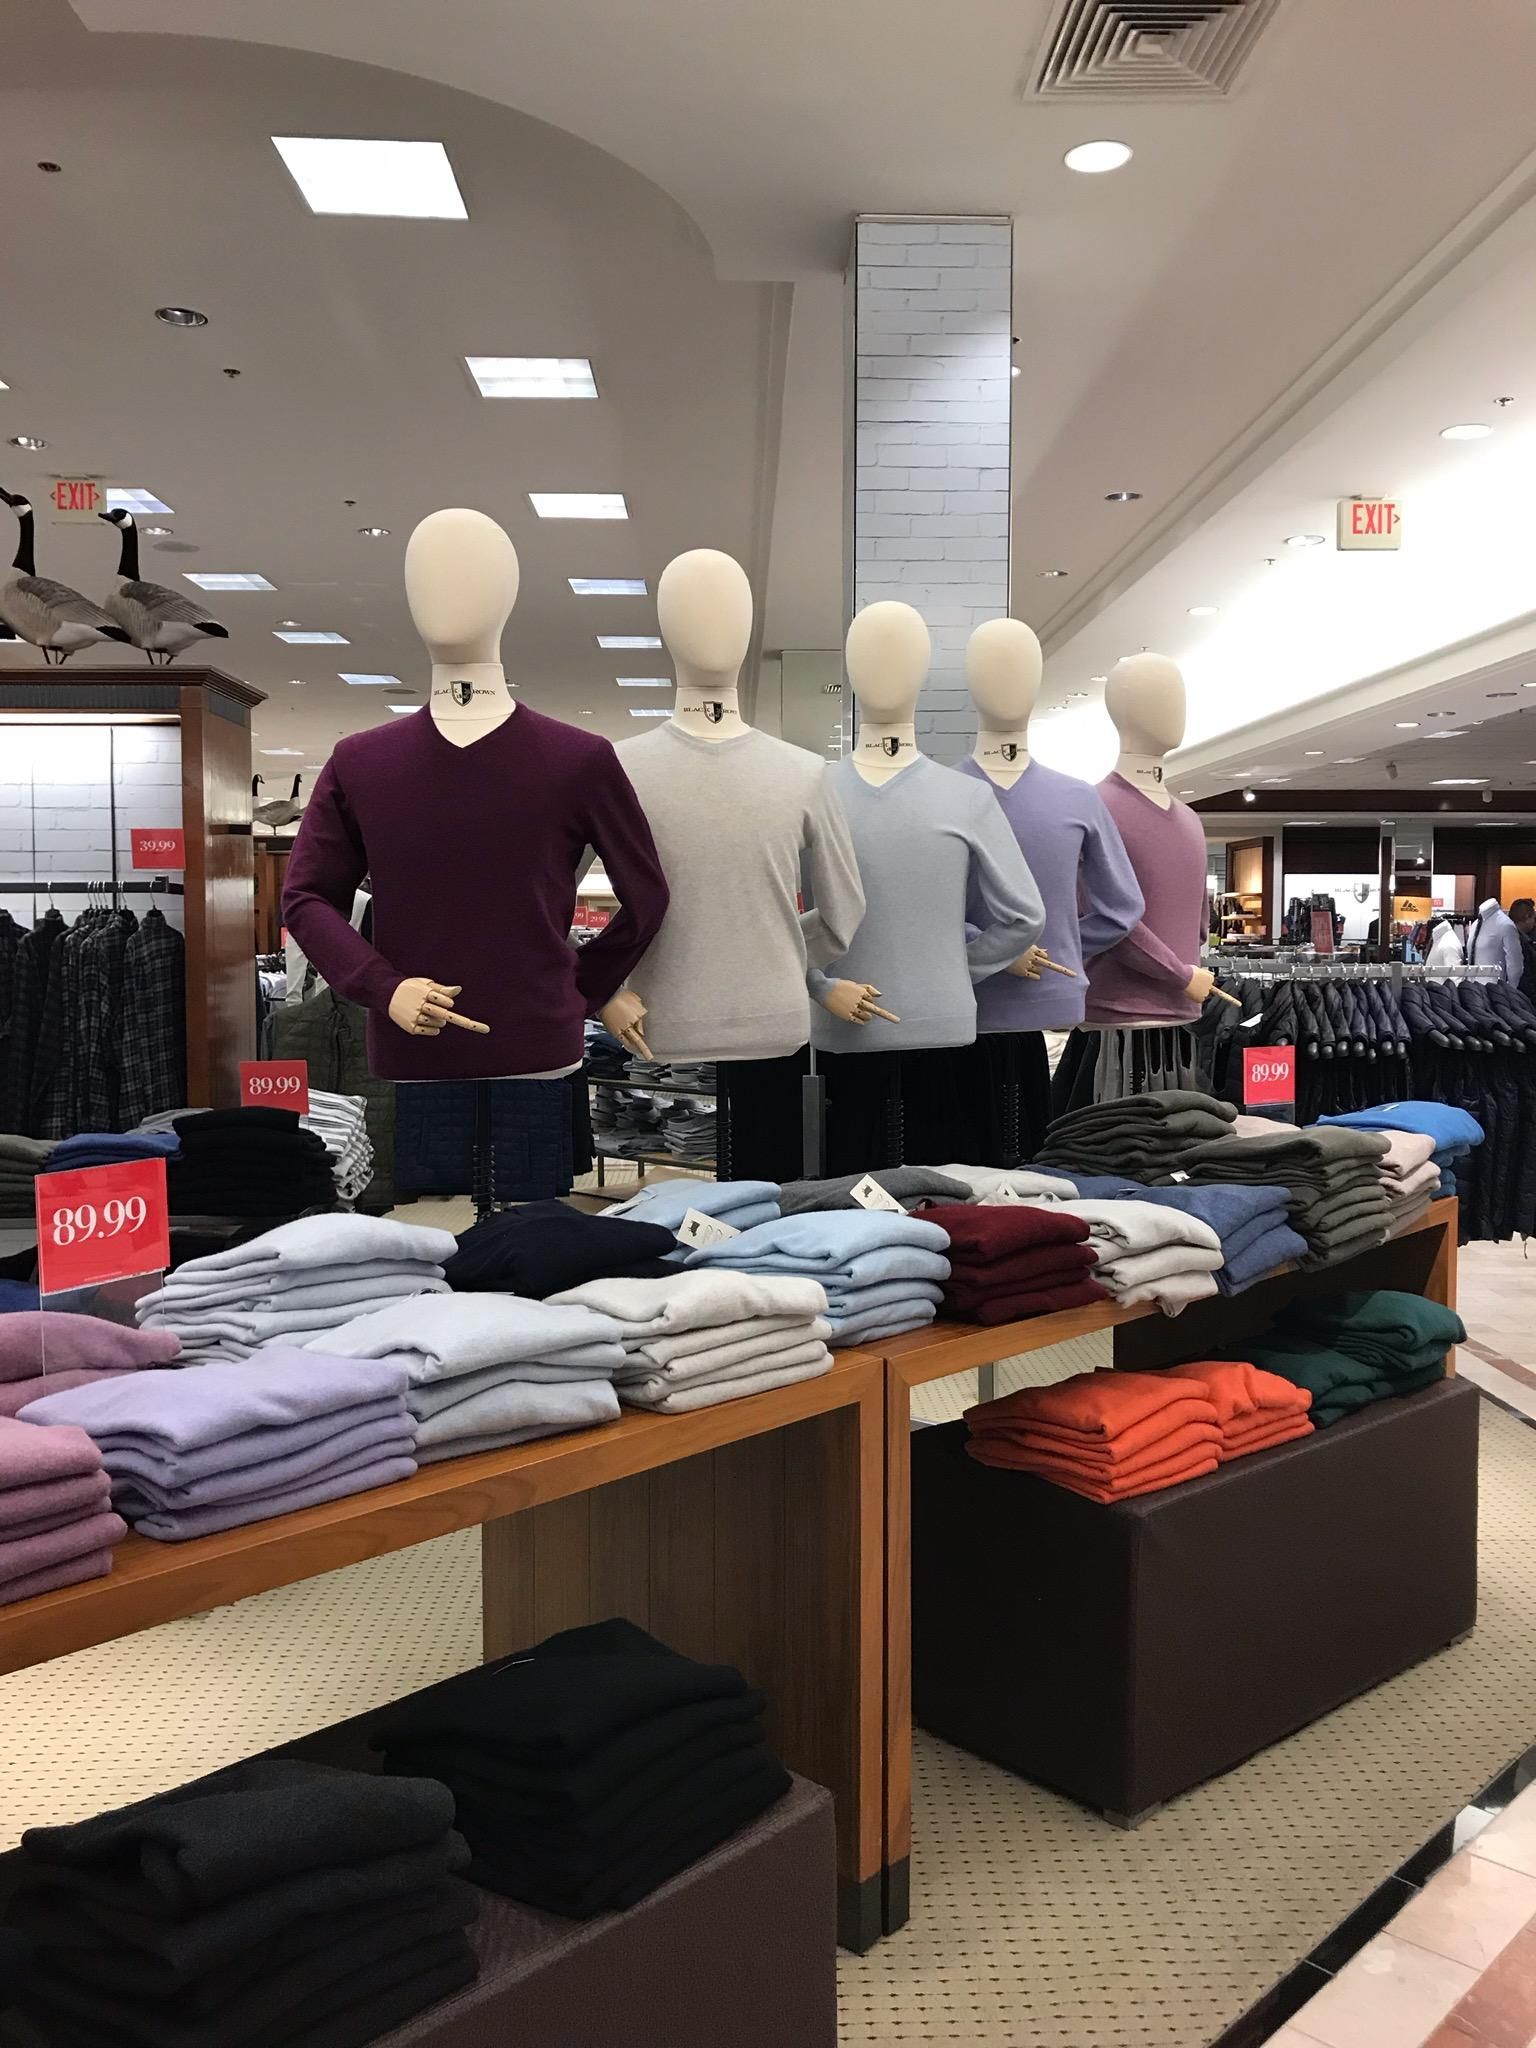 Dad sent me a picture of him "having fun in Lord & Taylor" while Mom shops